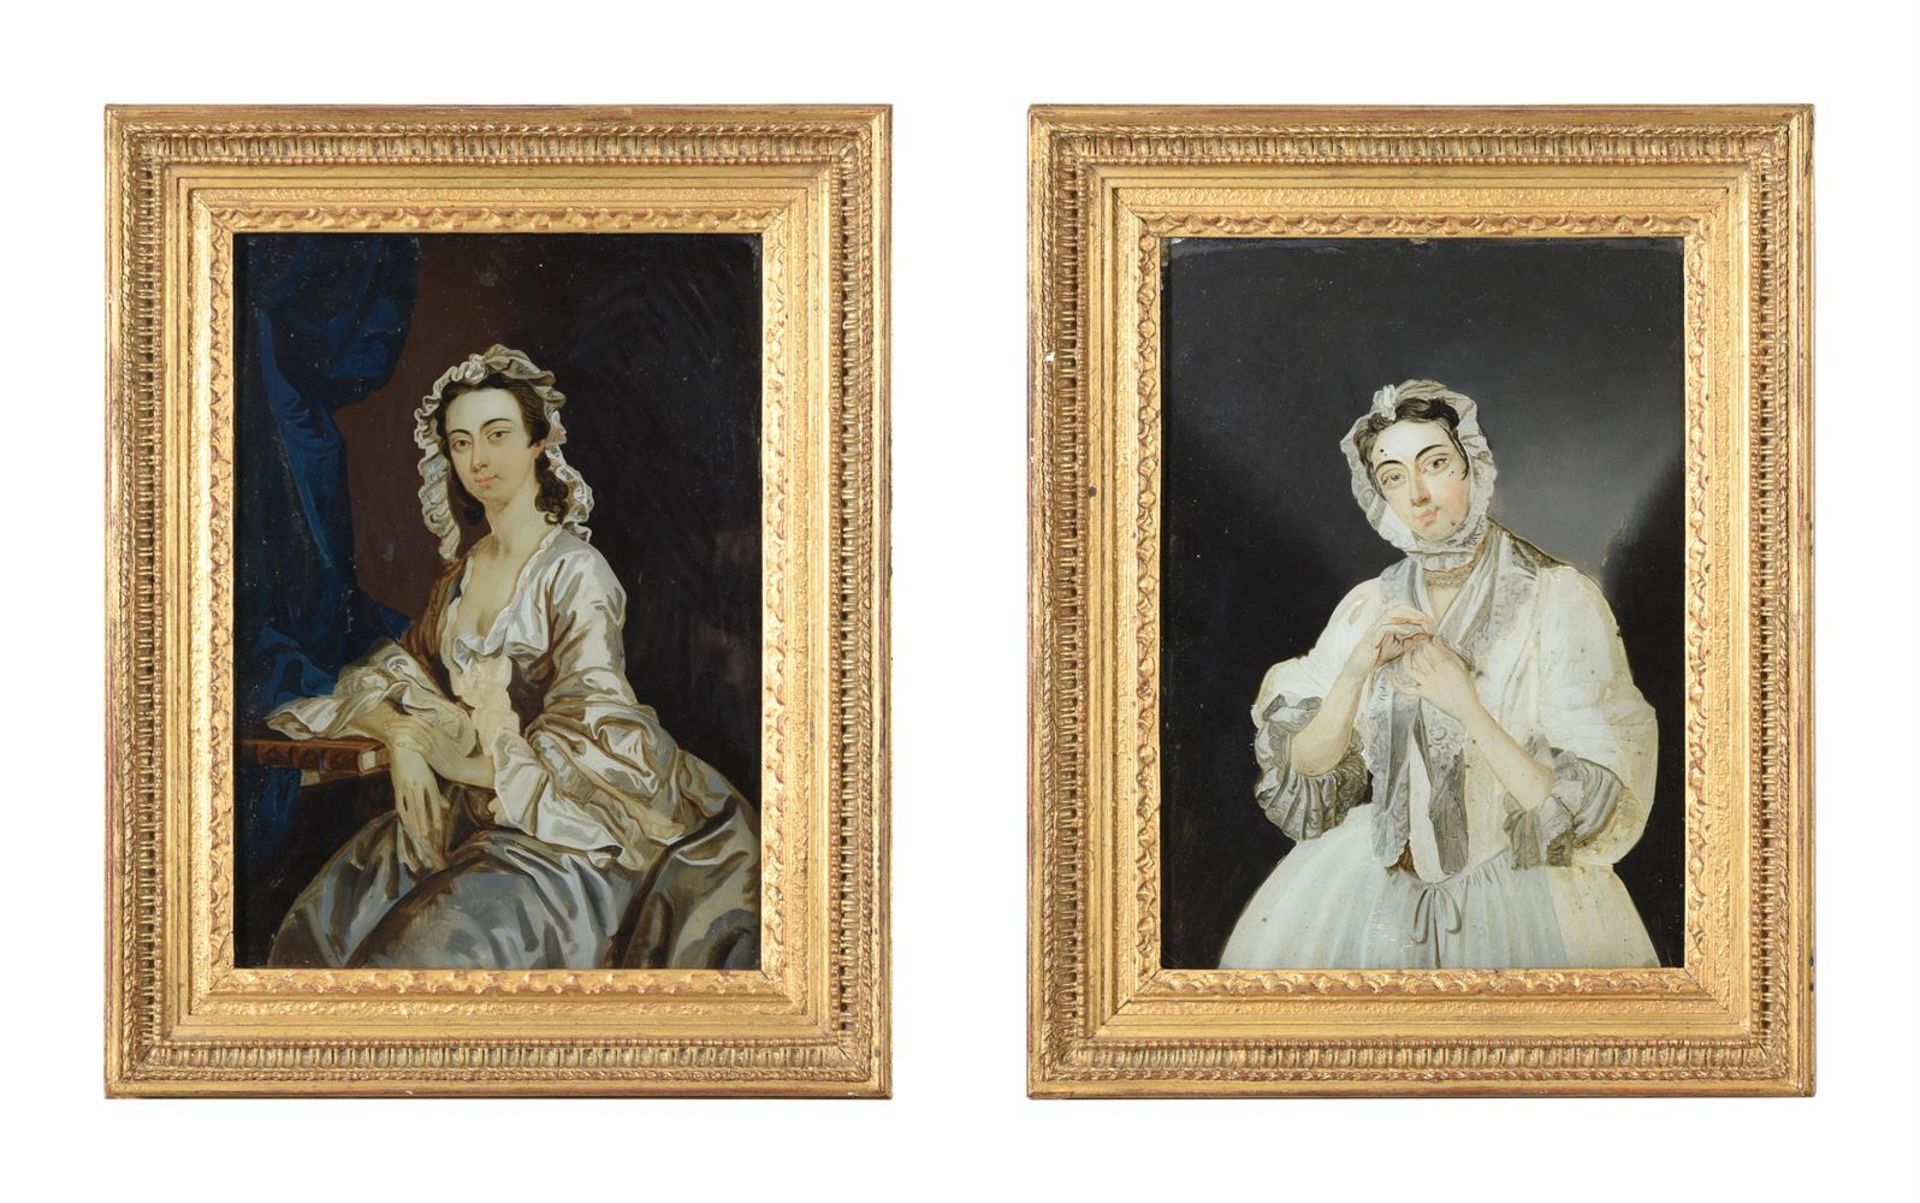 A PAIR OF CHINESE EXPORT REVERSE GLASS PAINTED PORTRAITS, 18TH/19TH CENTURY